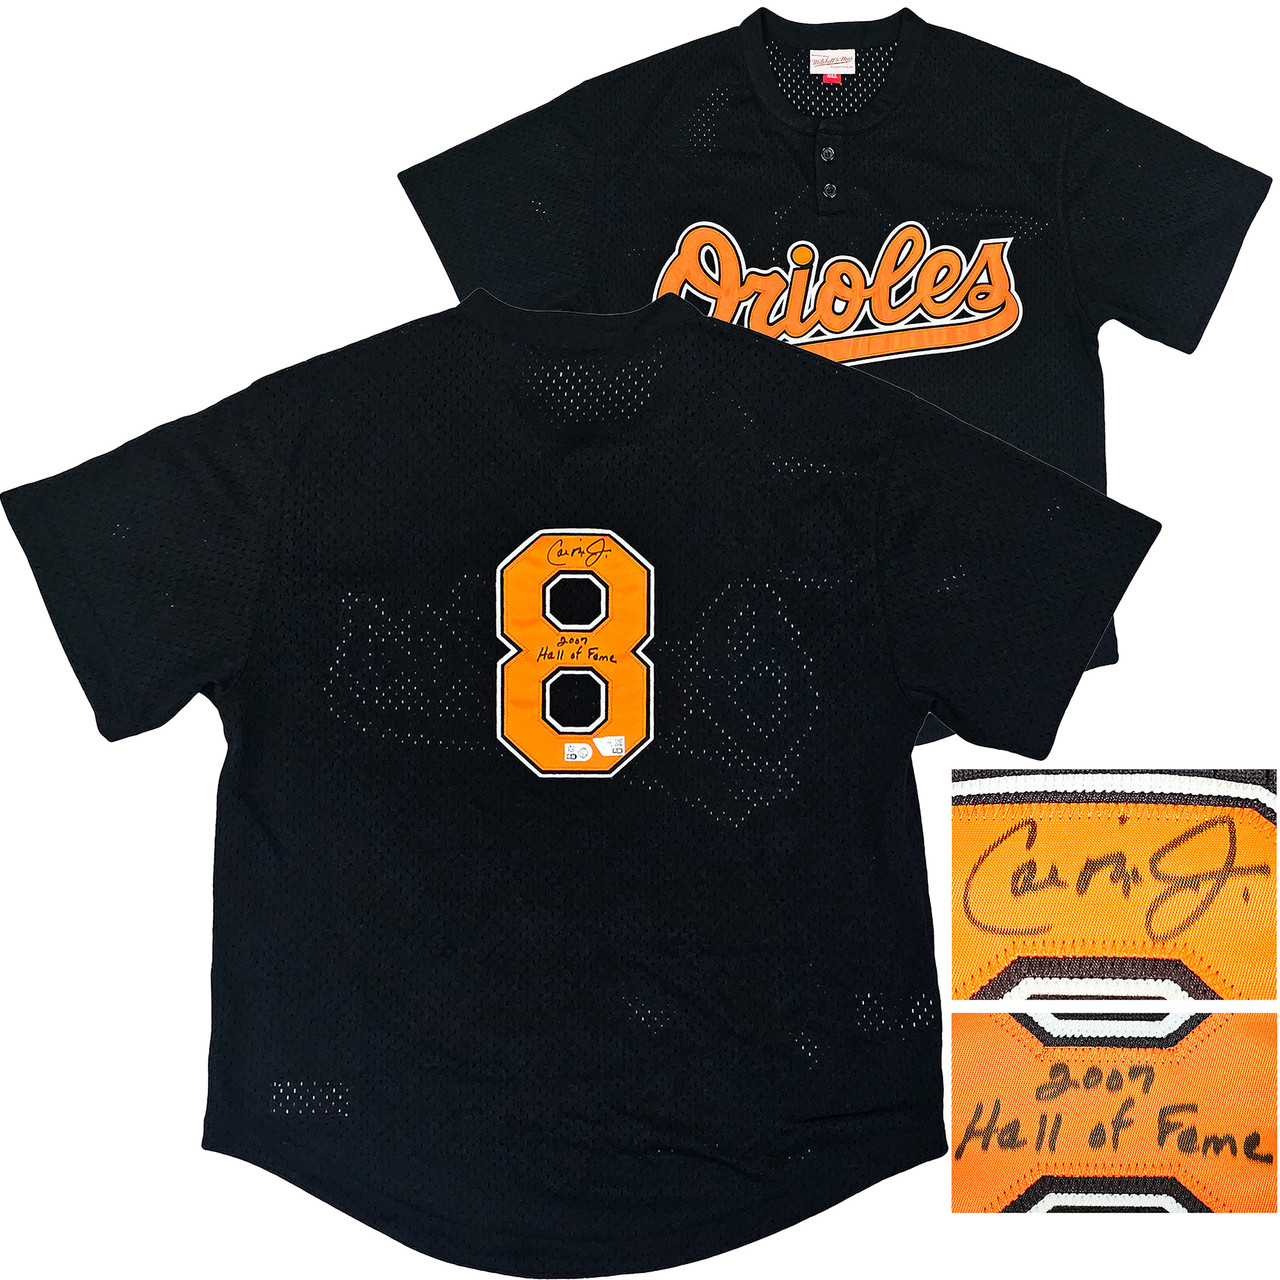 Cal Ripken Jr. White Baltimore Orioles Autographed Mitchell & Ness Replica  Jersey with 2007 Hall of Fame Inscription